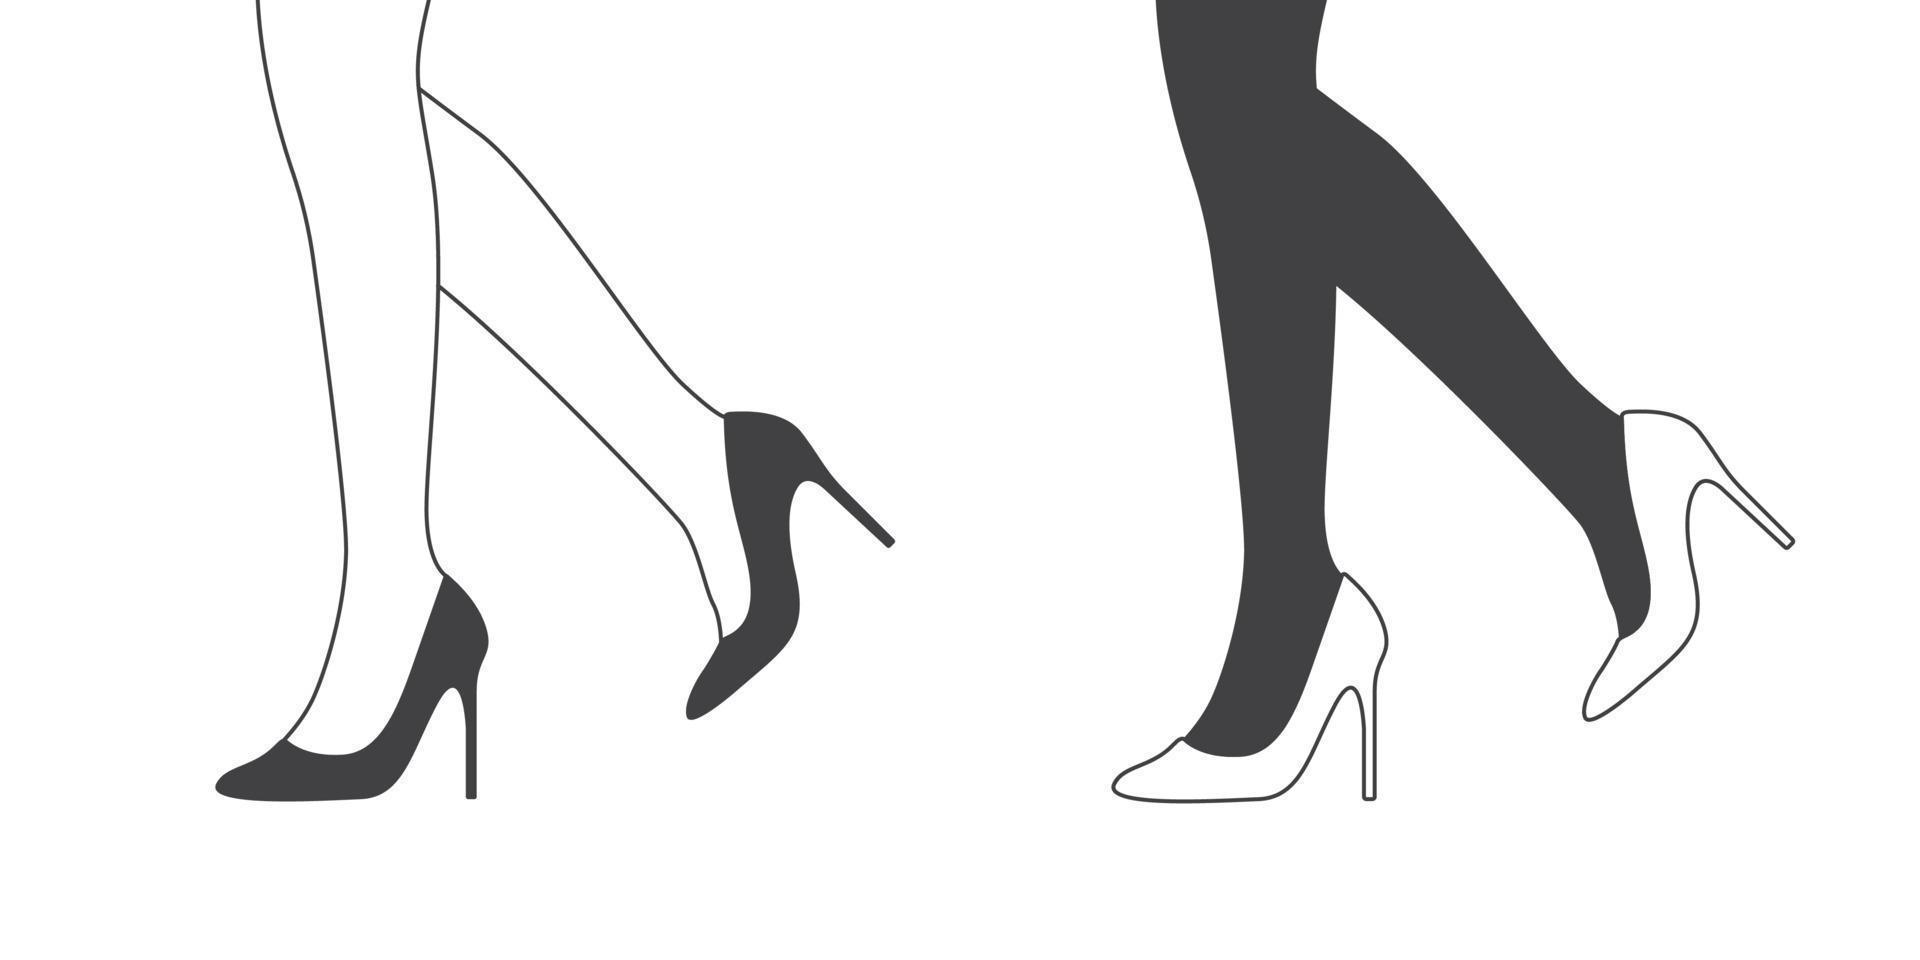 Women's feet in shoes. Women's shoes. Design in flat and linear style. Vector image